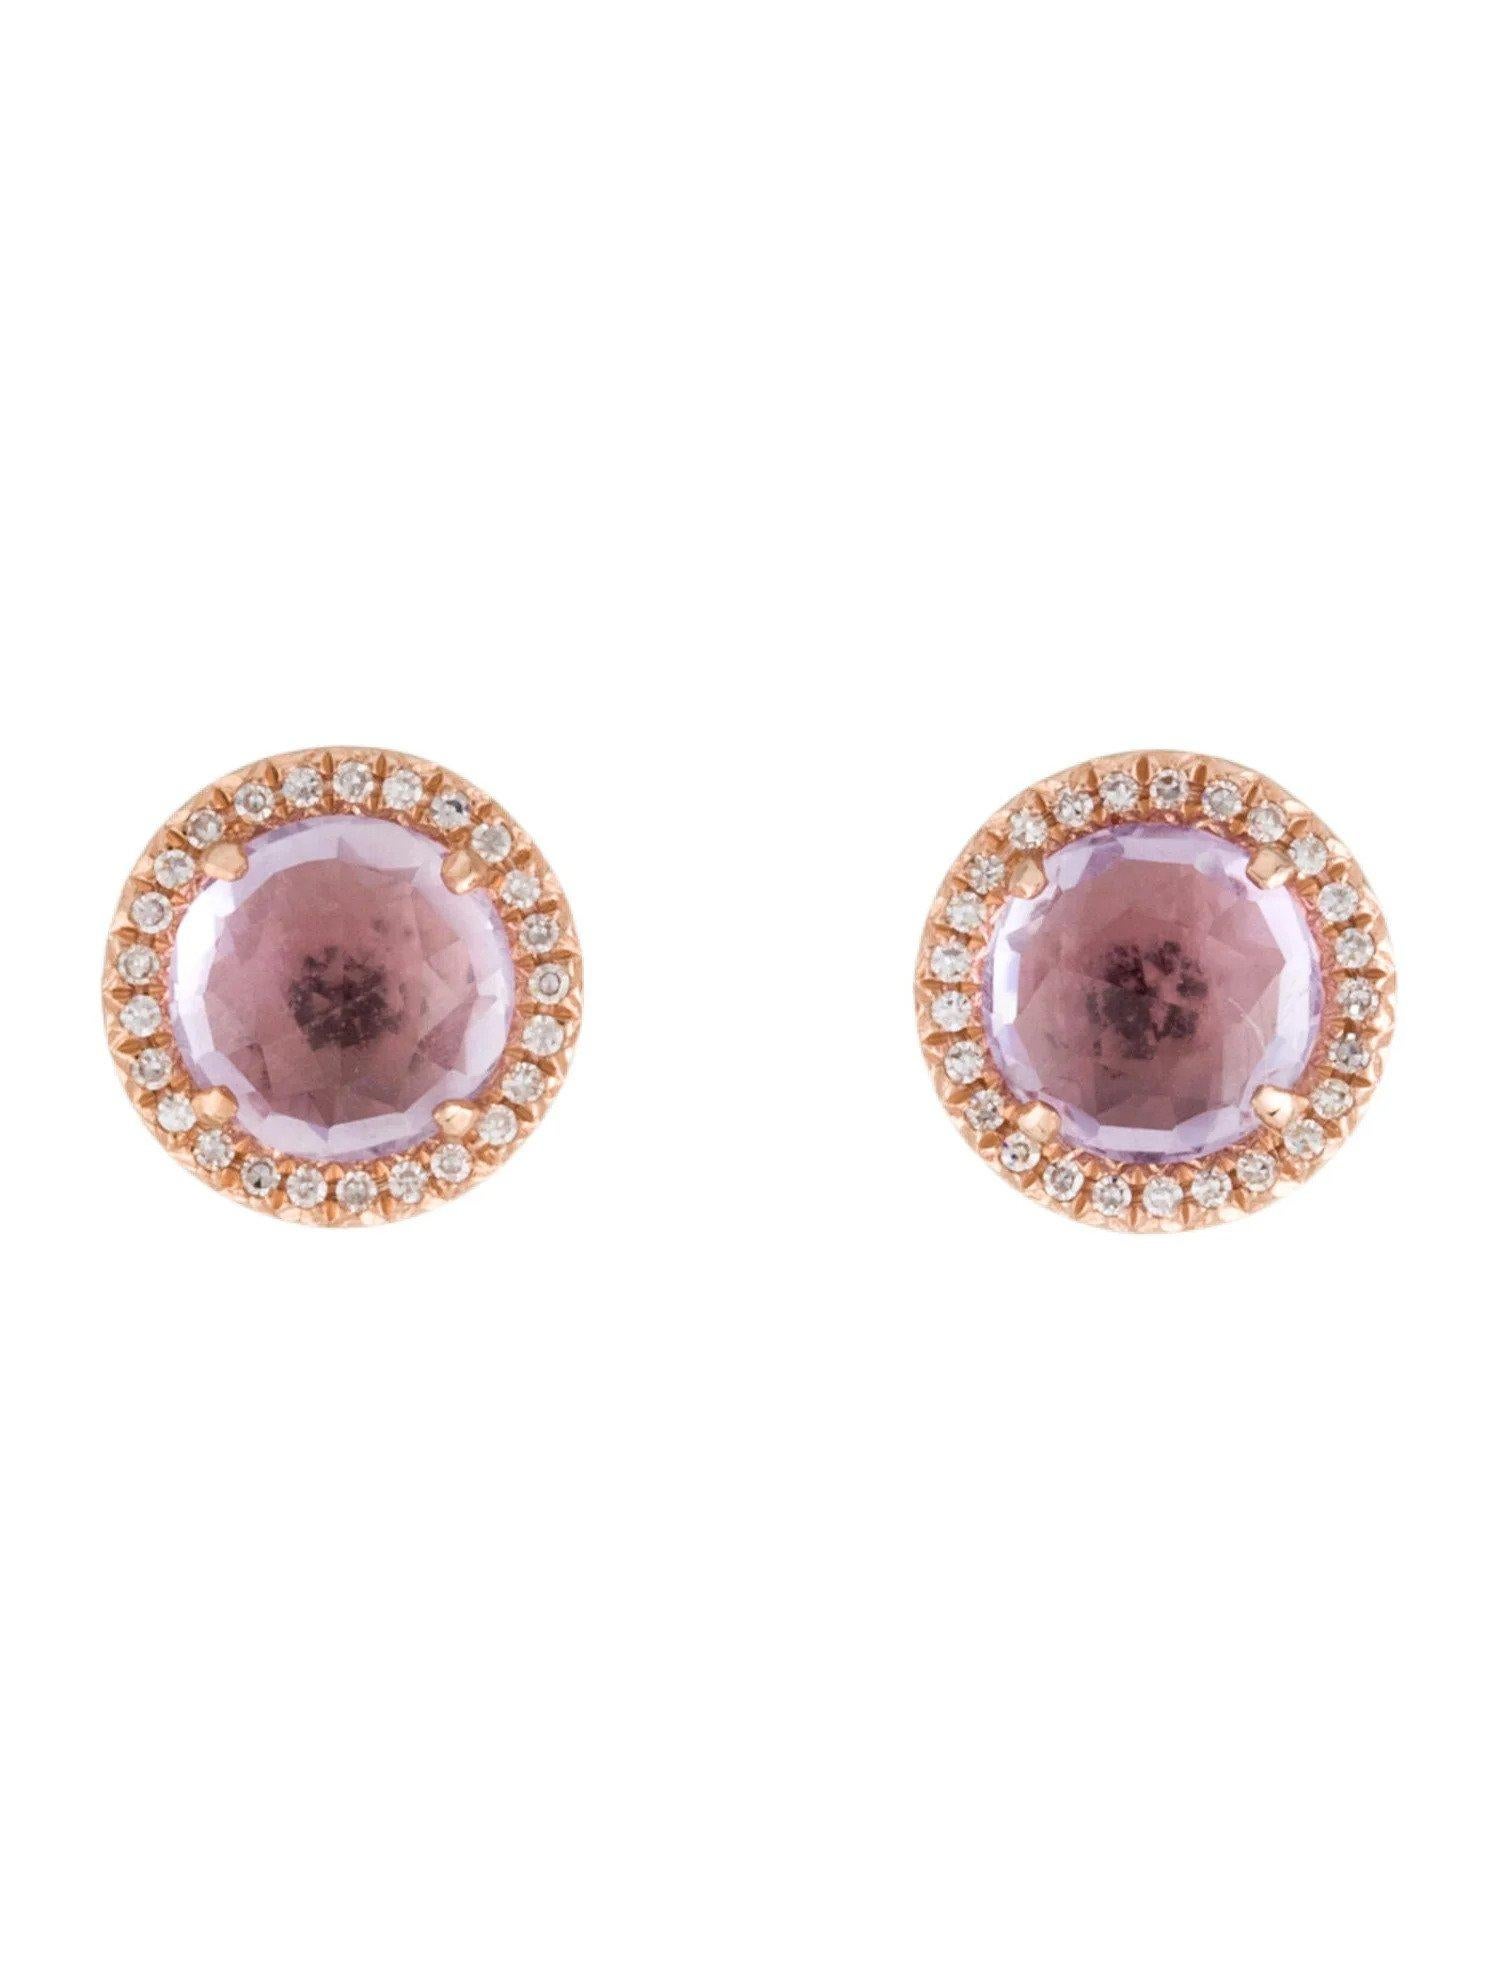 These Amethyst & Diamond Earrings are a stunning and timeless accessory that can add a touch of glamour and sophistication to any outfit. 

These earrings each feature a 0.93 Carat Round Pink Amethyst, with a Diamond Halo comprised of 0.06 Carats of